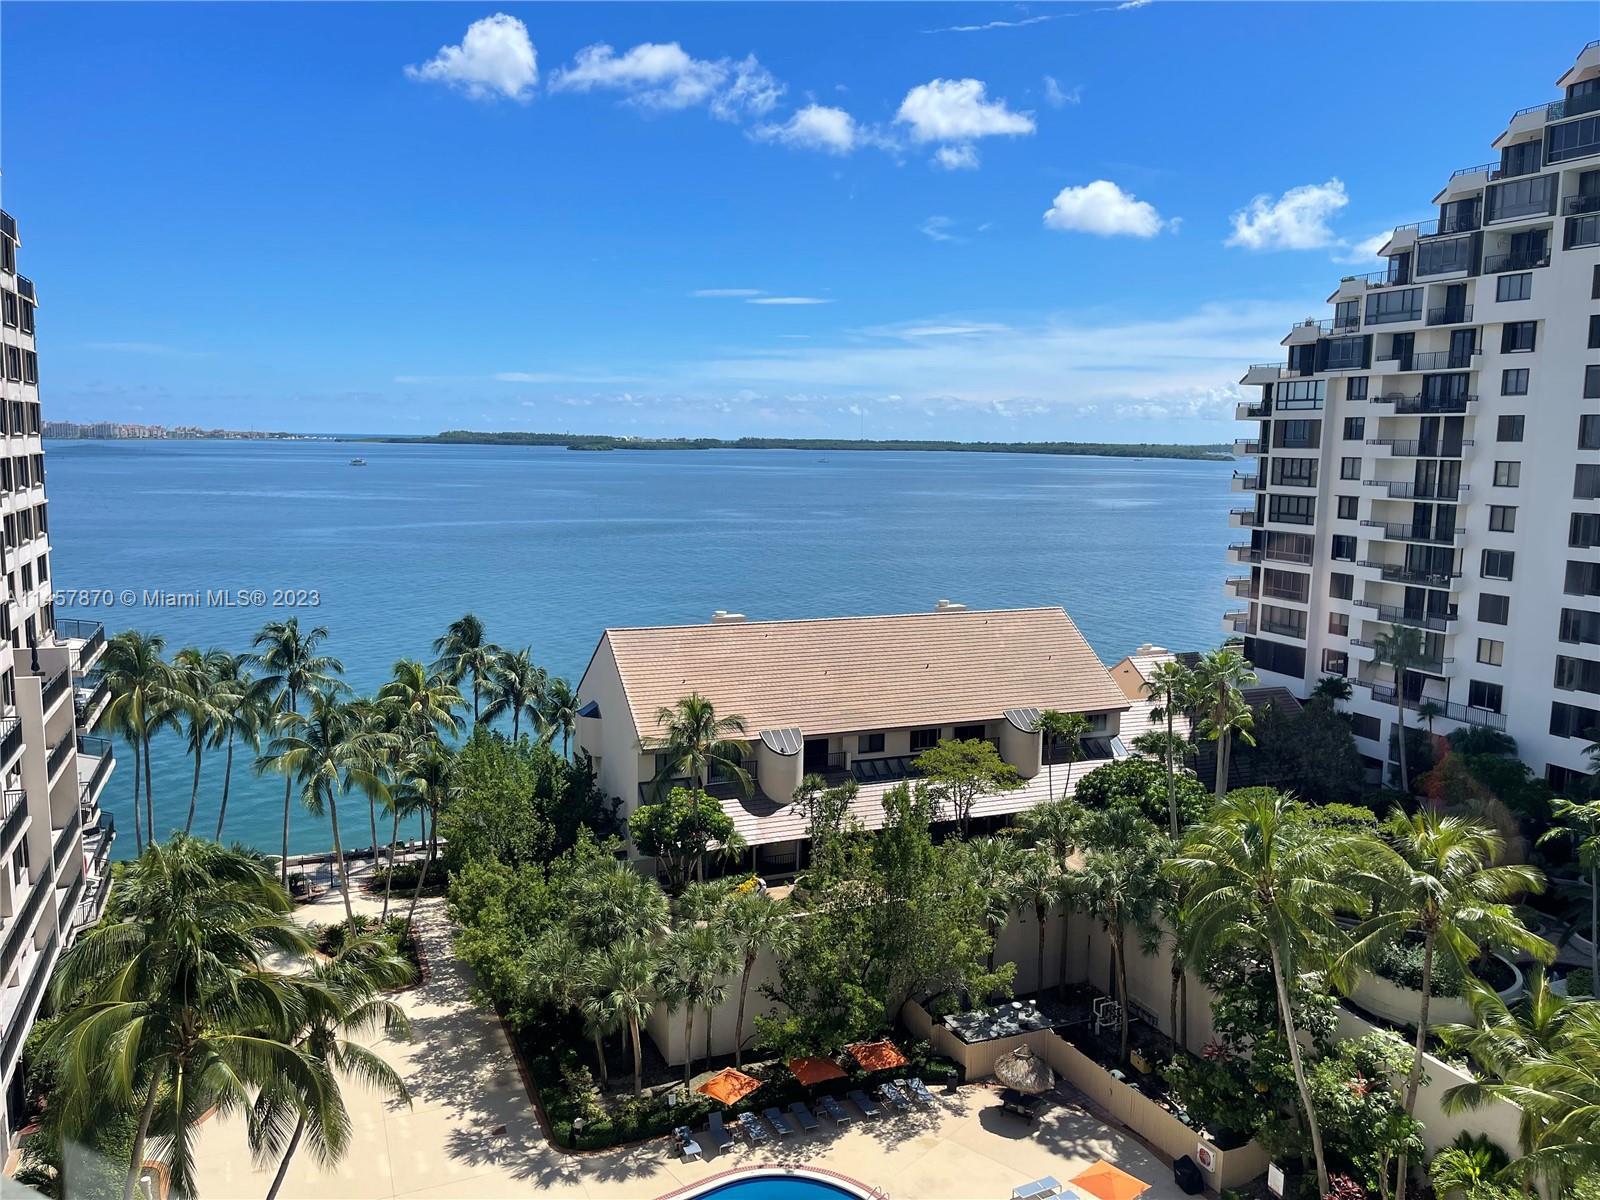 Wake up with an amazing view of Biscayne Bay in the heart of prestigious Brickell Key! 1 bedroom, 1 